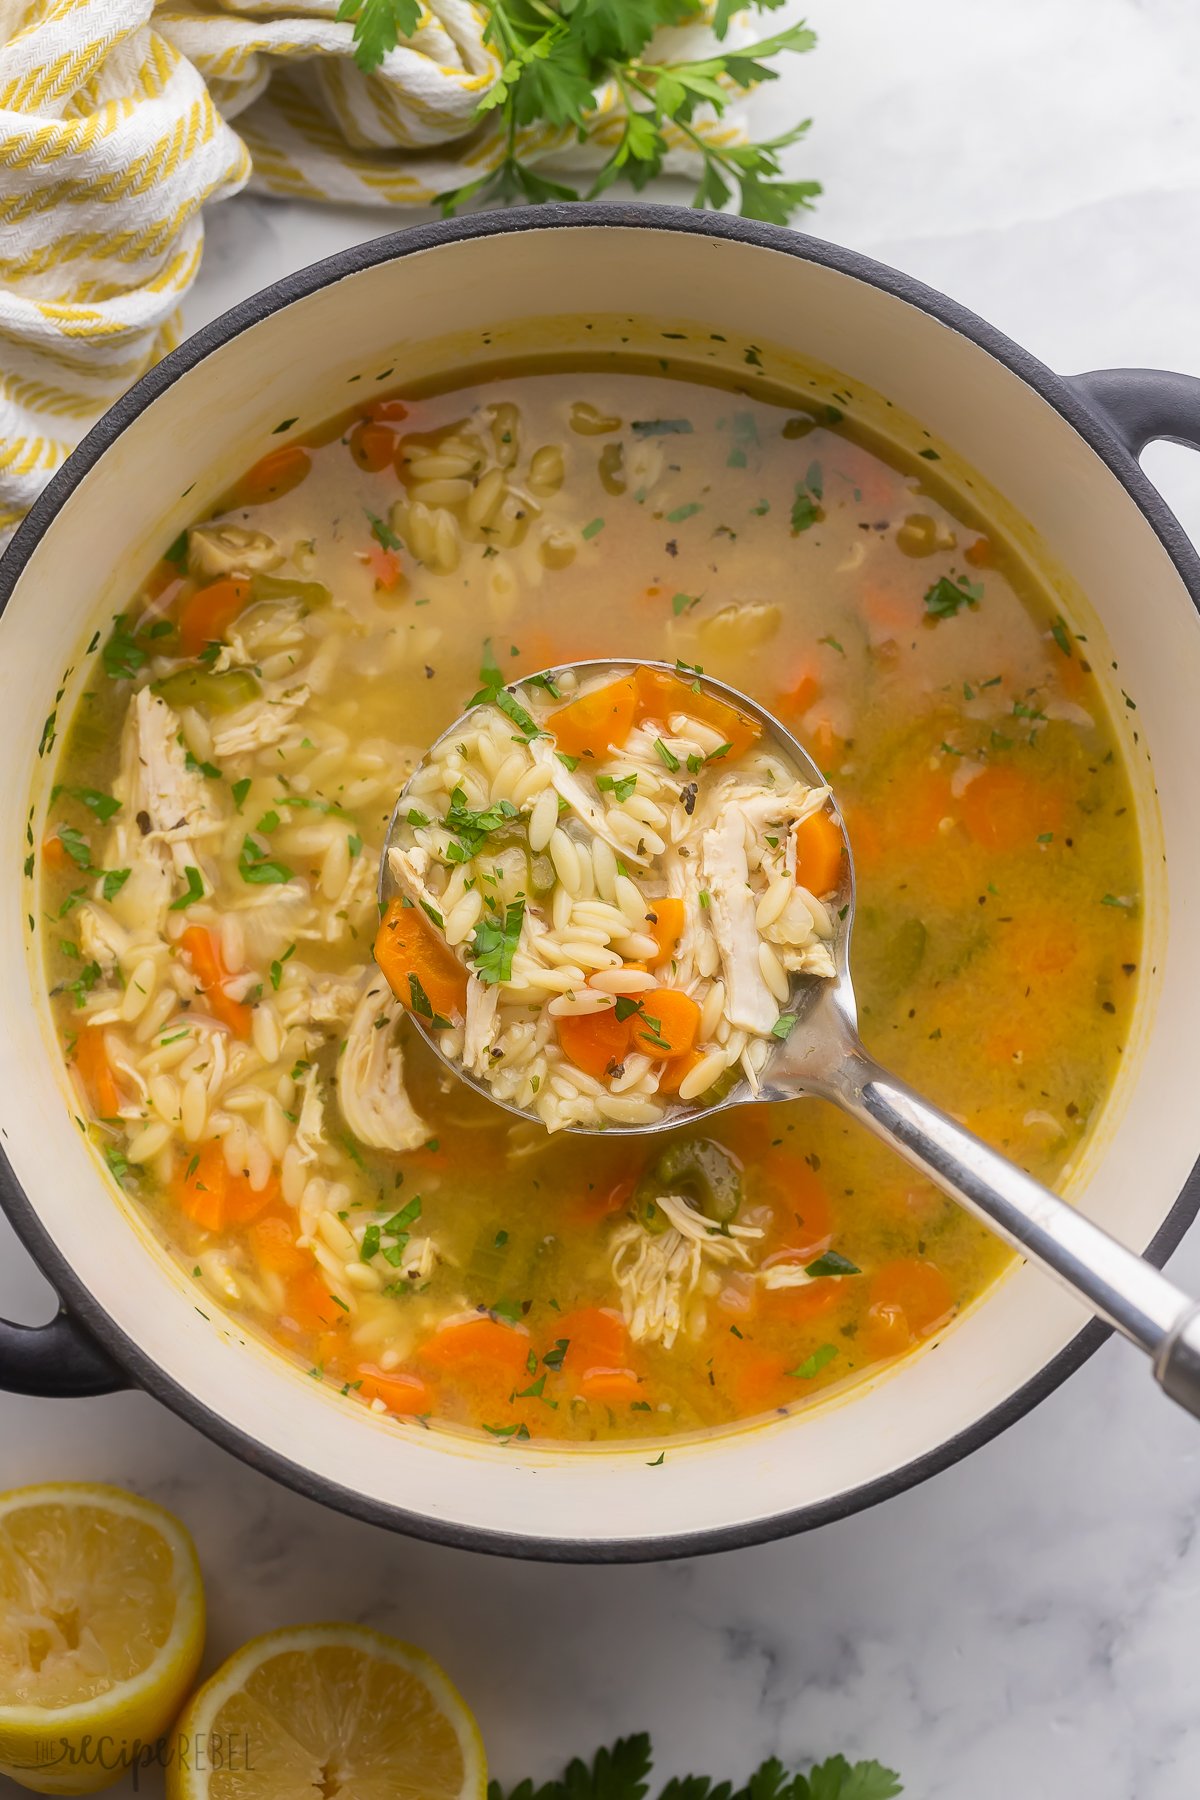 a full ladle of lemon chicken orzo soup above black and white pot full of soup.